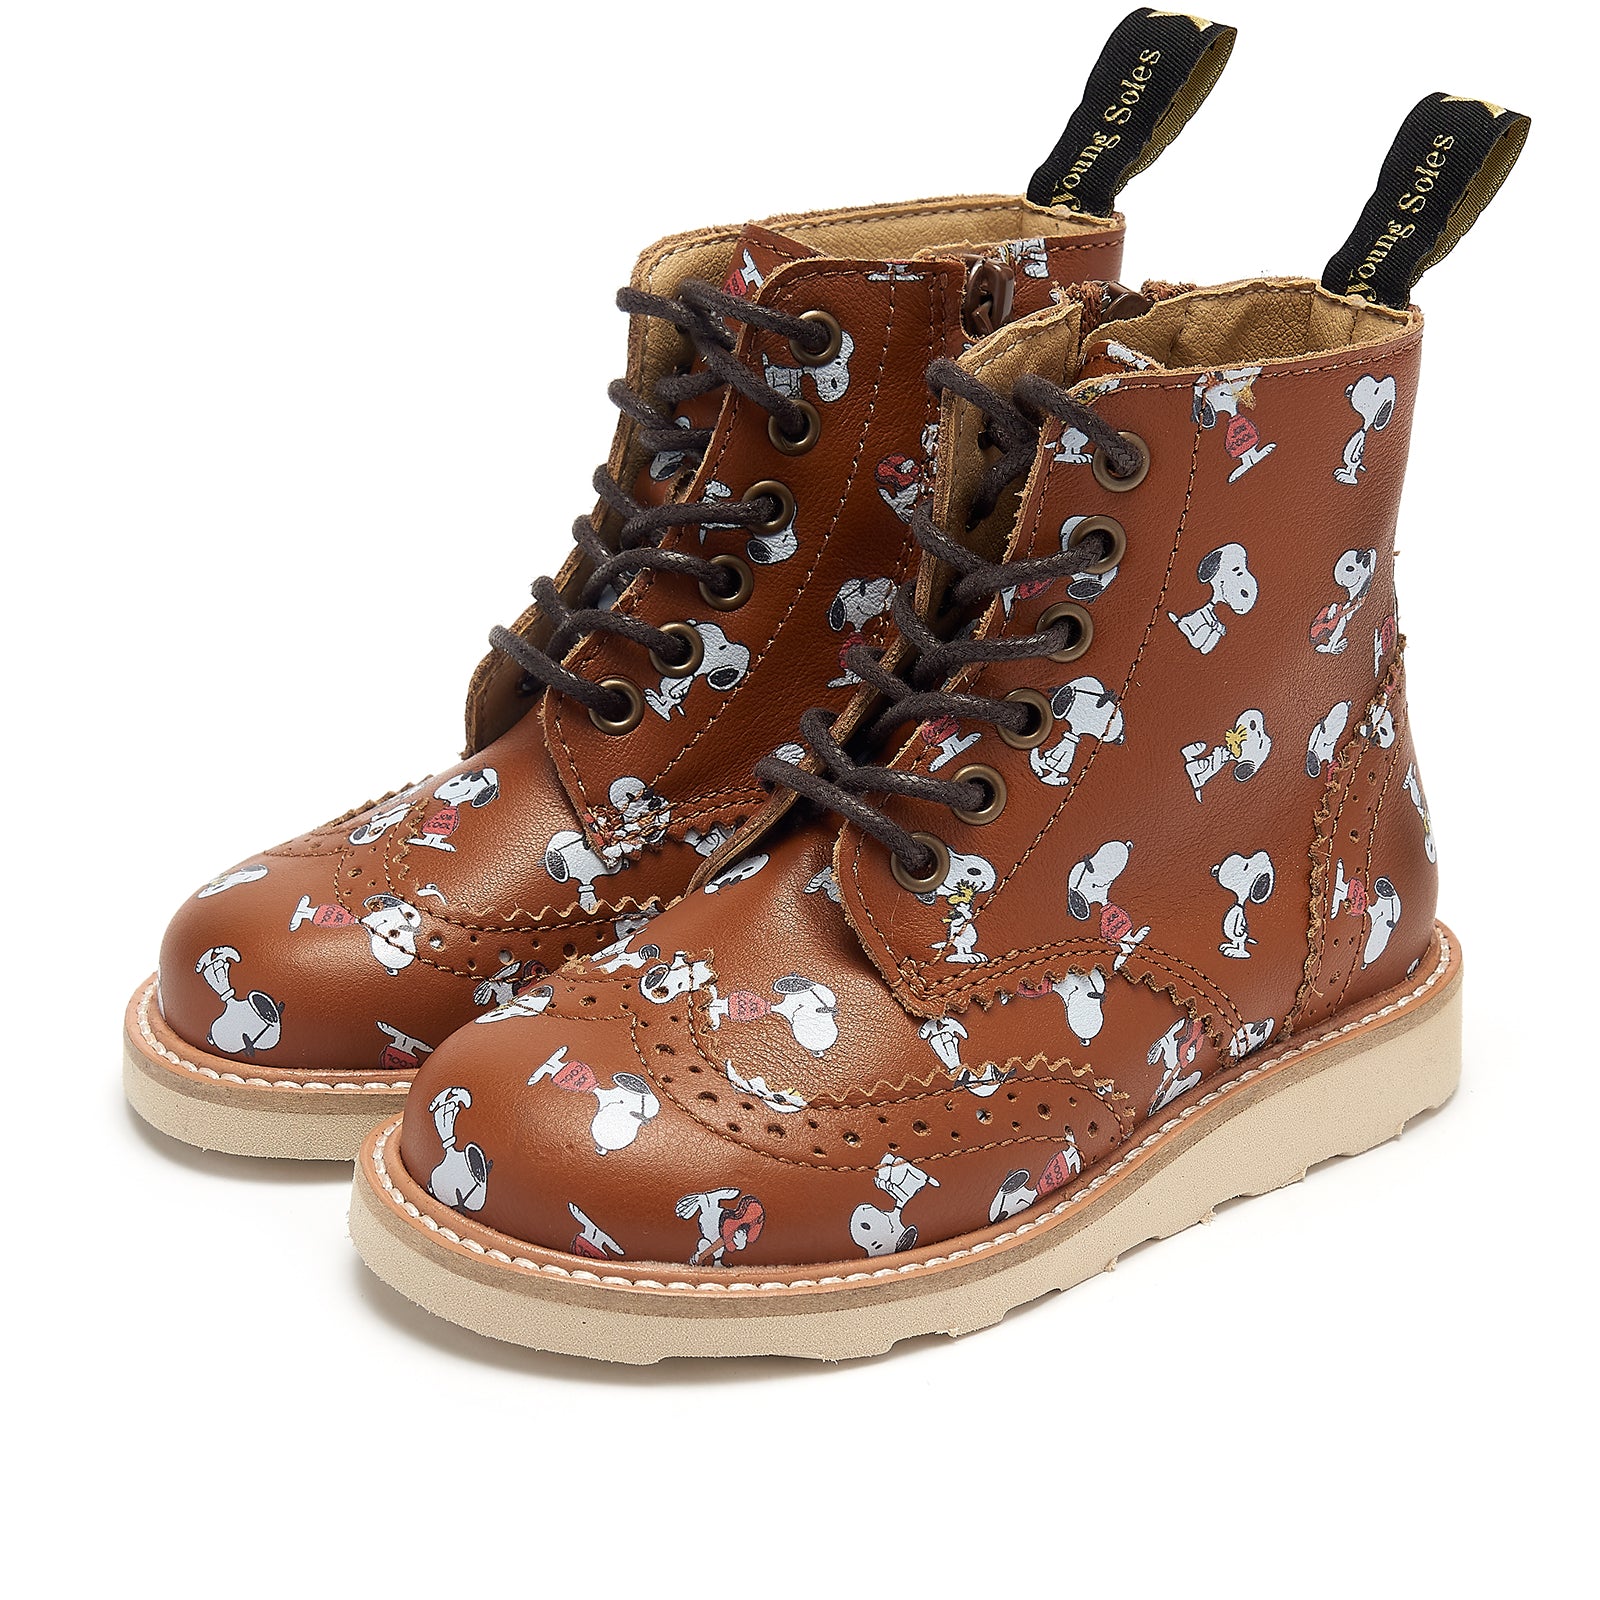 Young Soles Sidney Snoopy Leather Boots